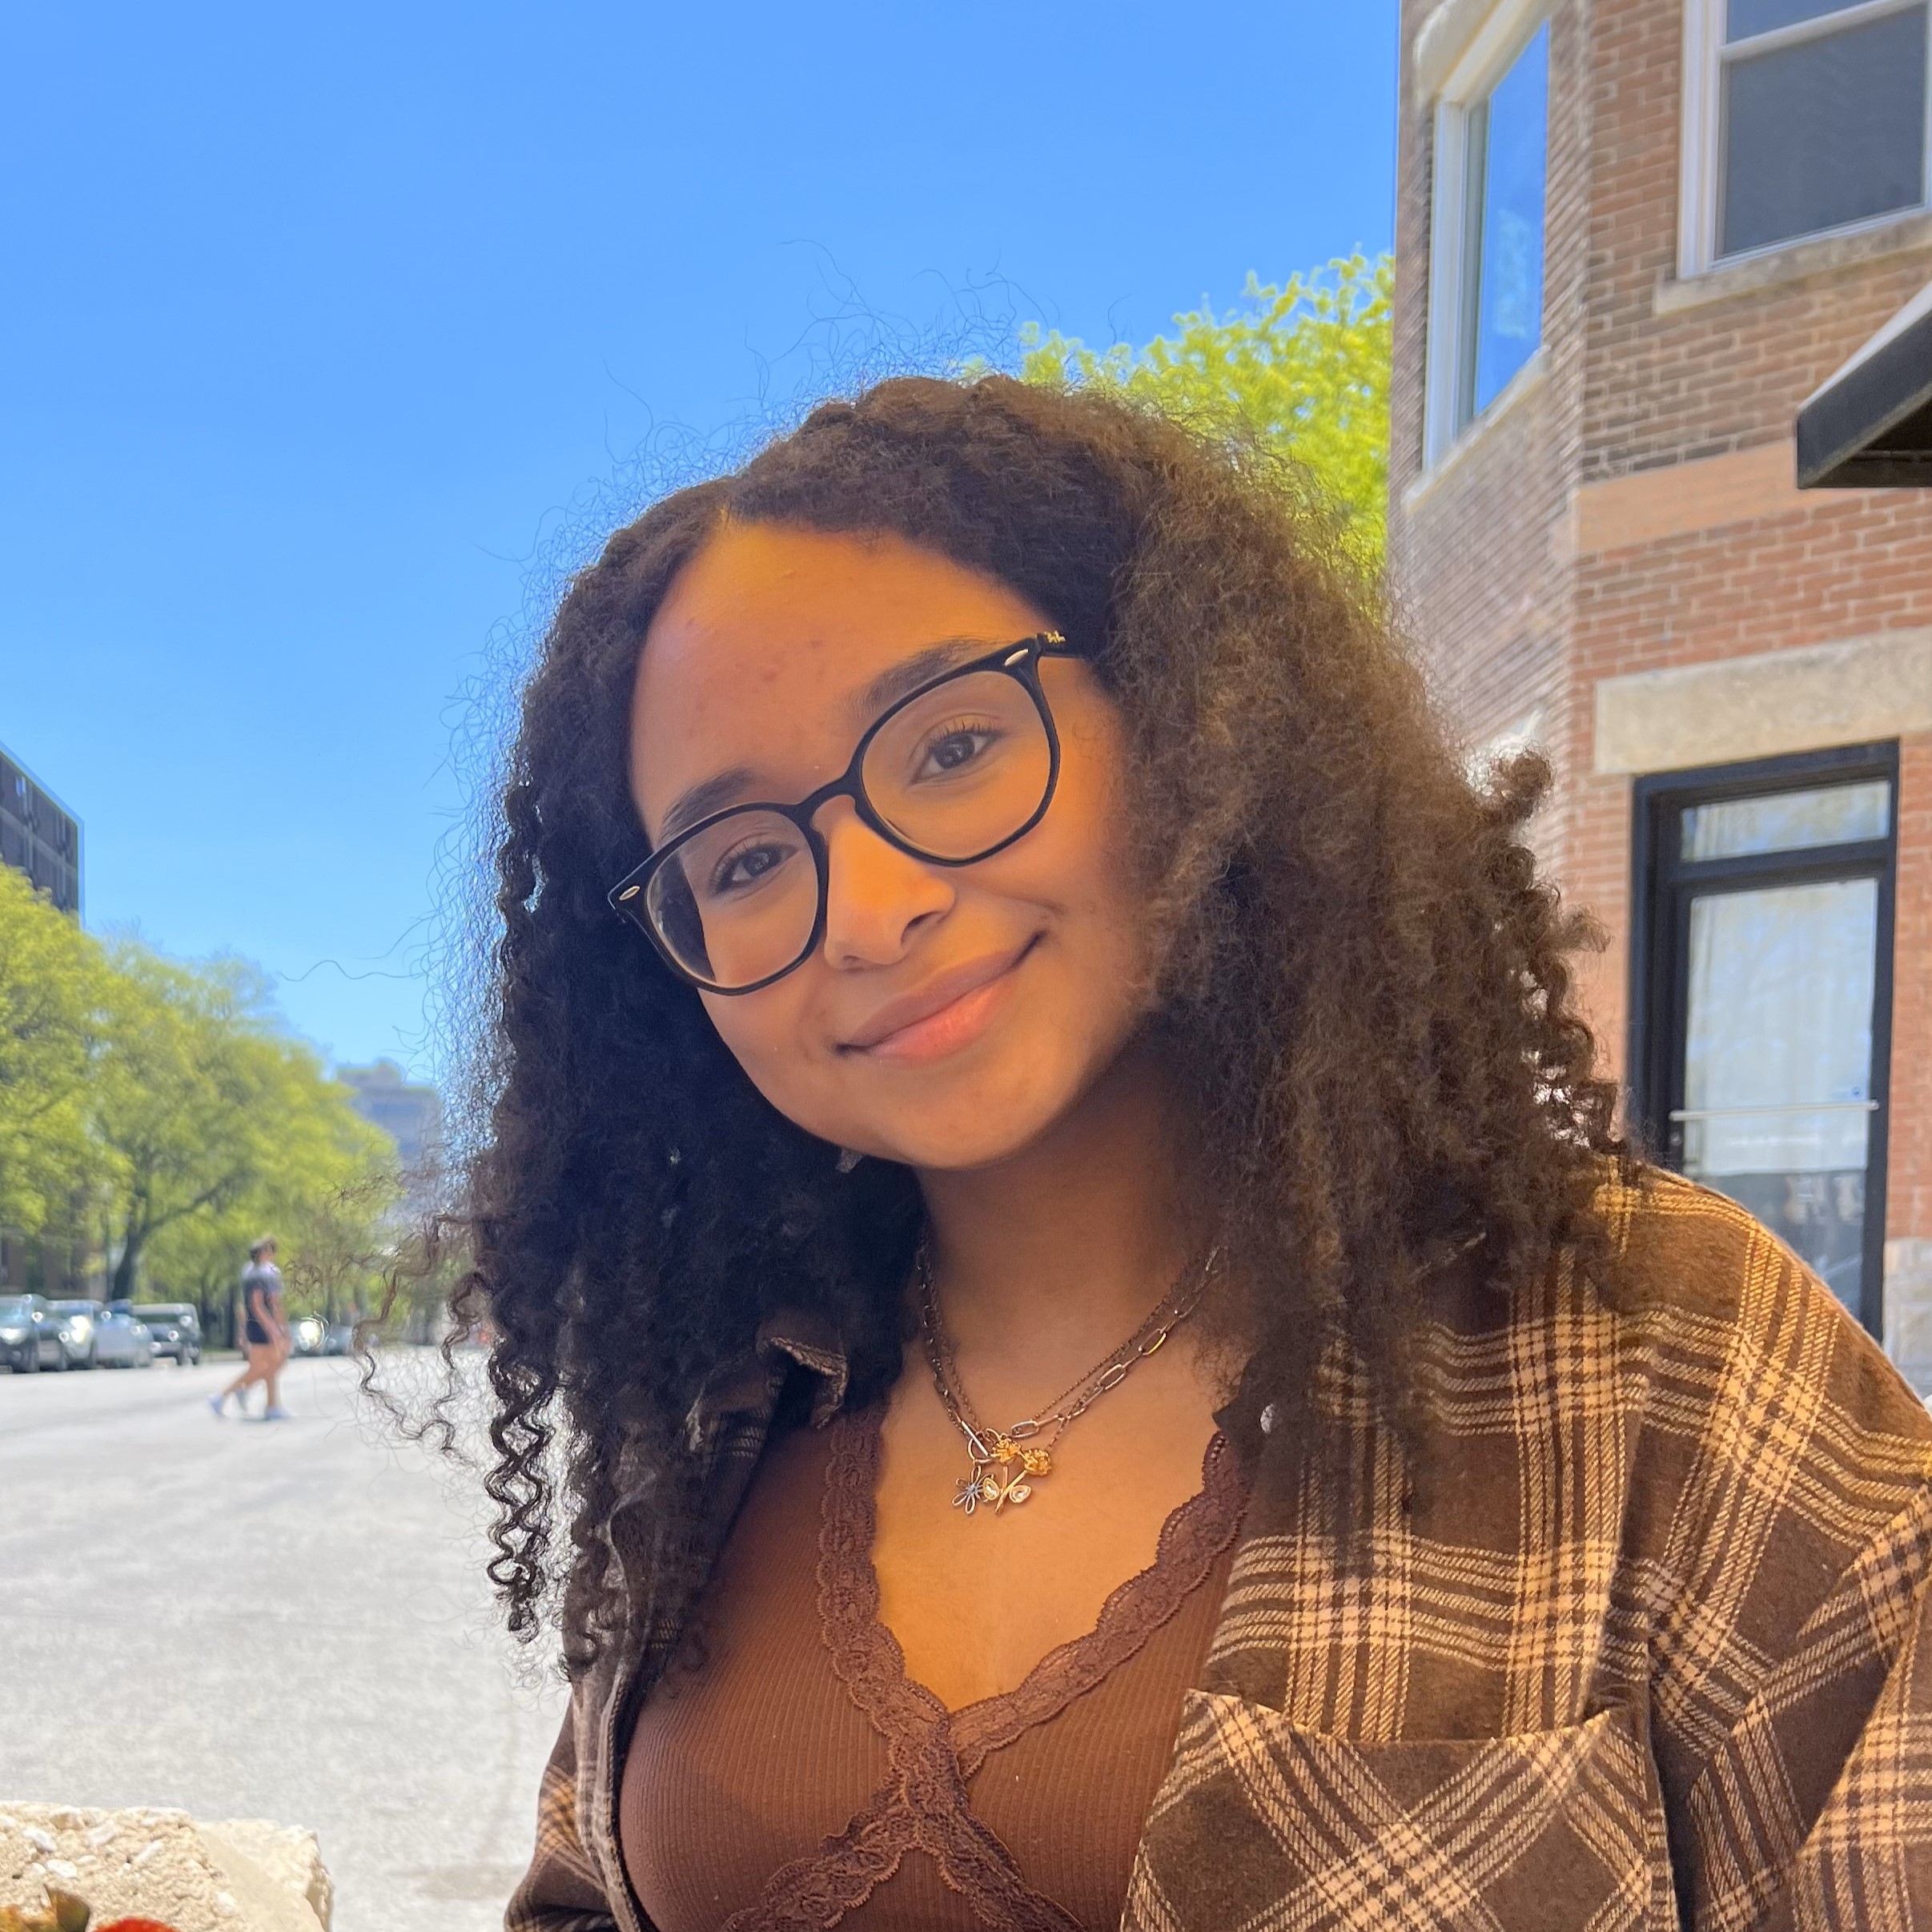 Samreen Ibrahim is a second year student majoring in Computer Science with interests in AI and ML. Through ESWNU, she hopes to explore innovative engineering solutions for a more sustainable future. She is currently working on the plumbing team for the AutoAquaponics project.